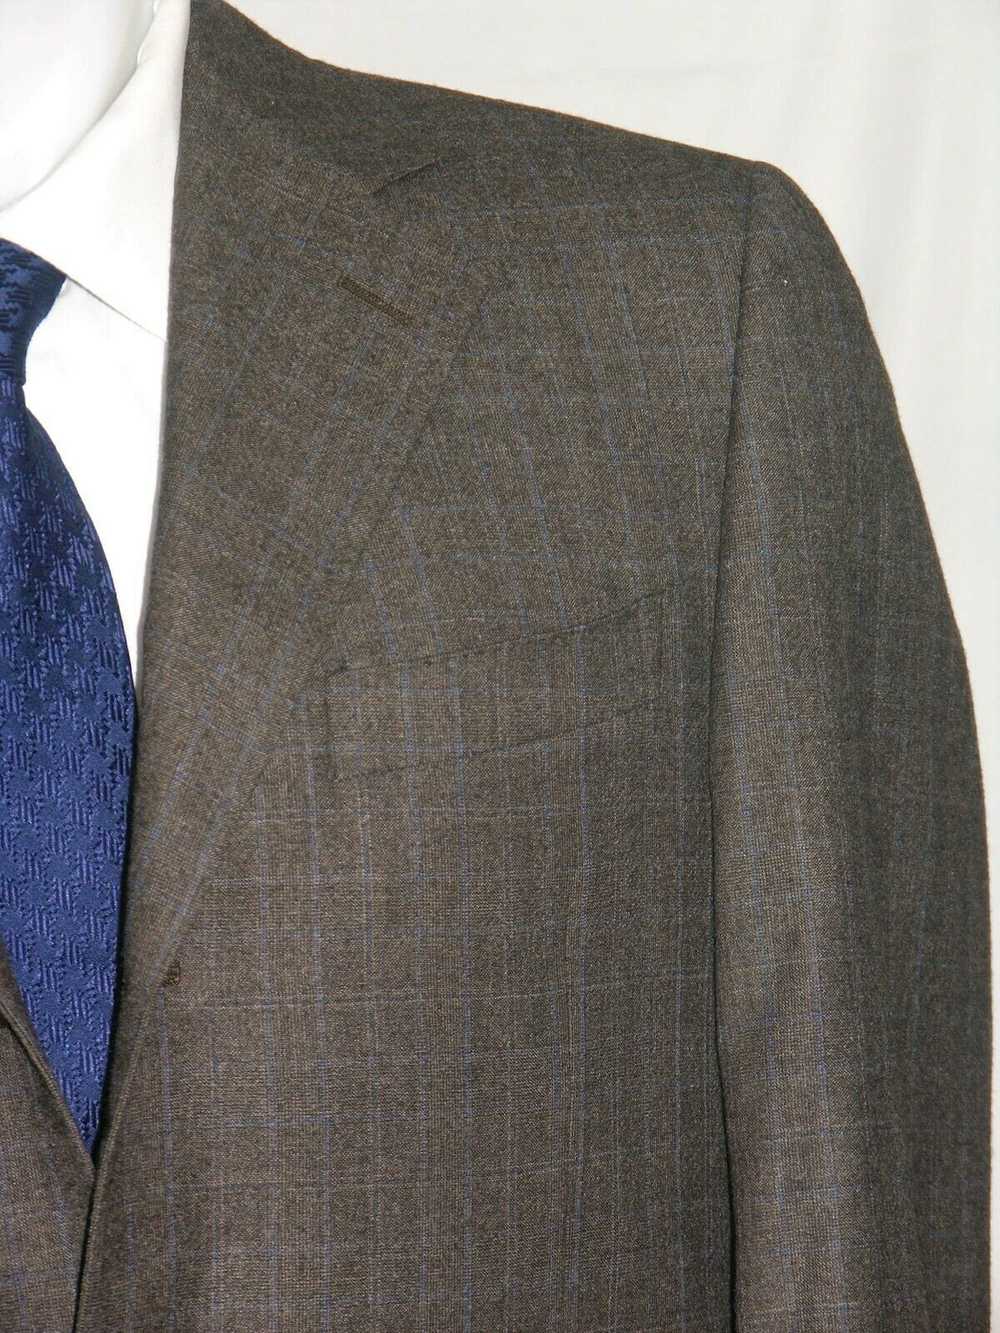 Canali Three Roll Two Super 130 Suit 38S - image 5